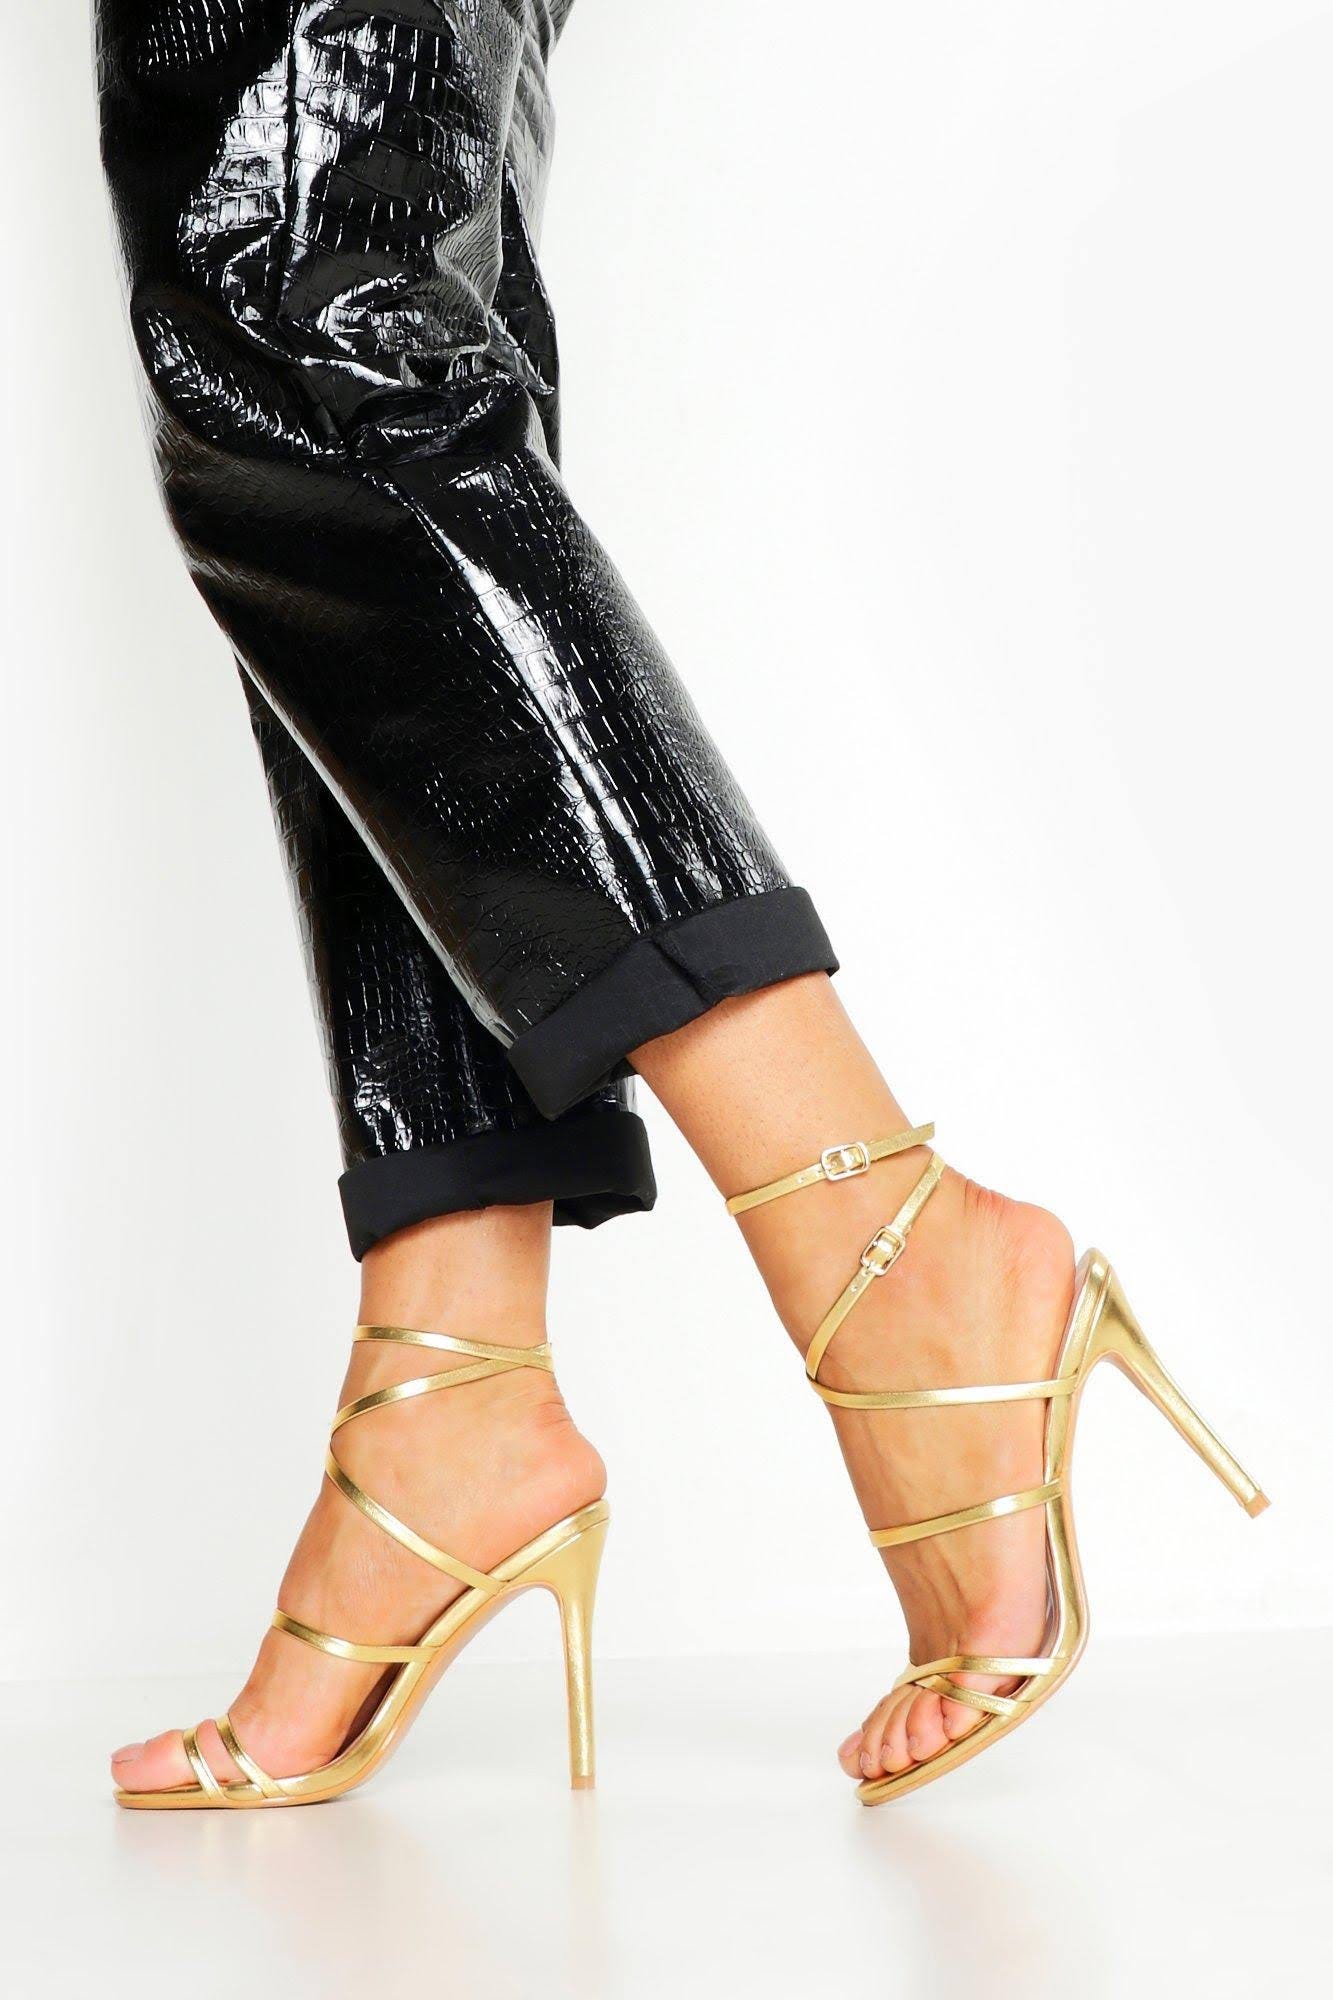 Golden Metallic Strappy Heels for a Chic, Comfortable Look | Image